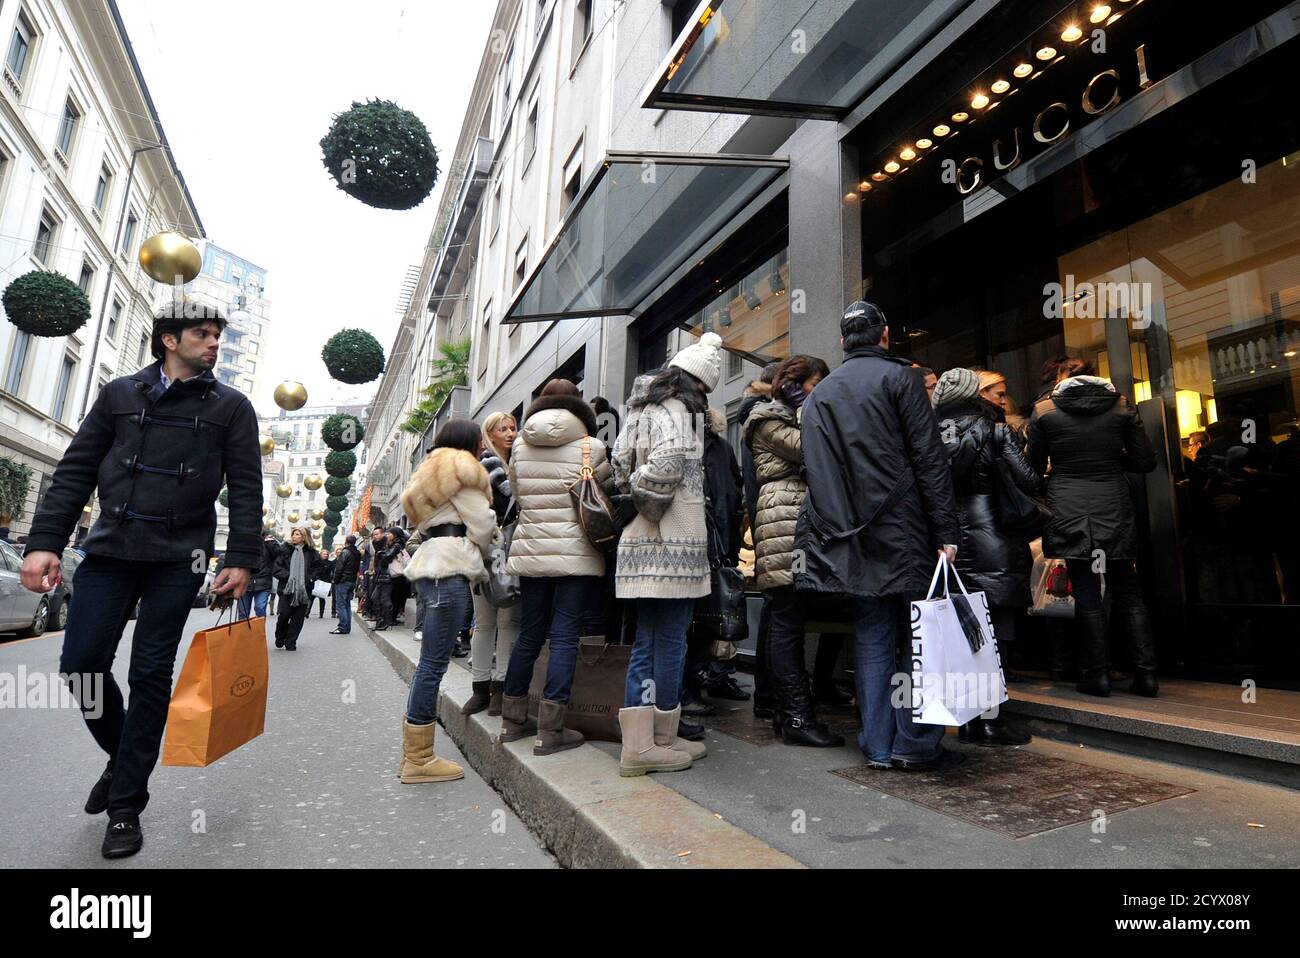 Tegne forsikring At adskille Mesterskab A passer-by (L) looks on as shoppers queue up outside a Gucci shop during  the first day of sales in downtown Milan January 6, 2011. REUTERS/Paolo  Bona (ITALY - Tags: BUSINESS SOCIETY